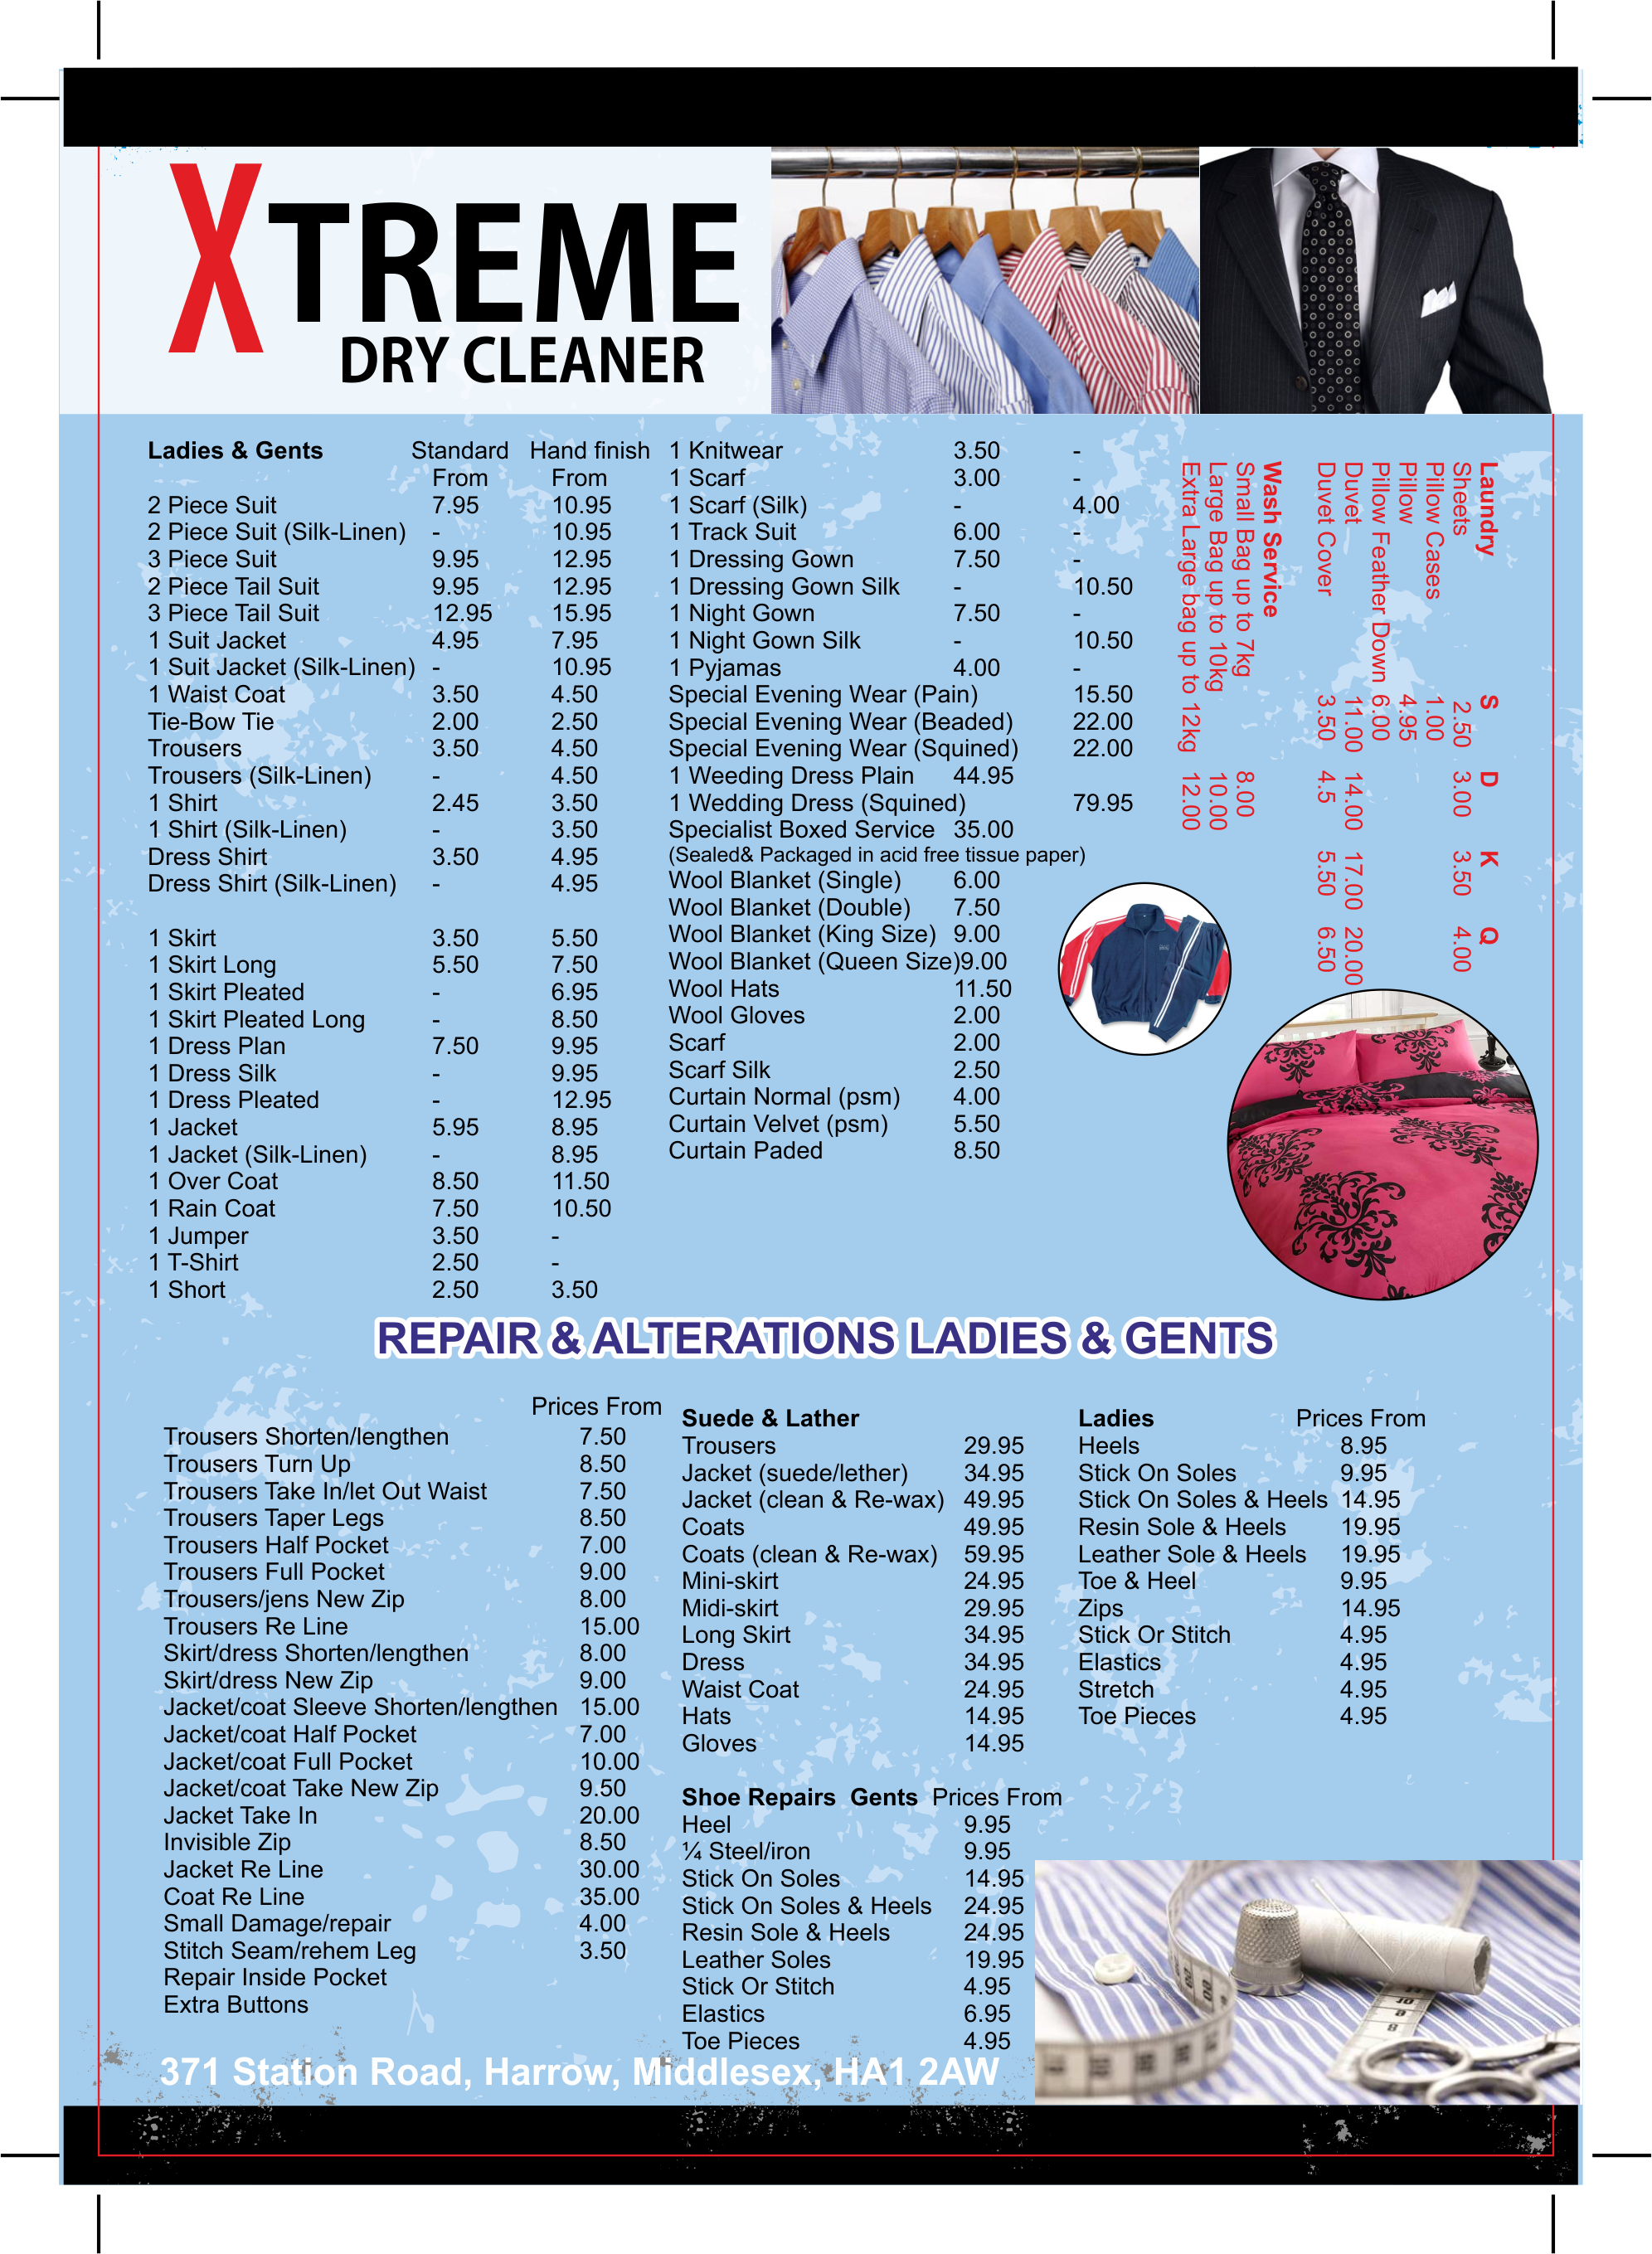 Dry Cleaning Alteration Prices Xtreme Dry Cleaners